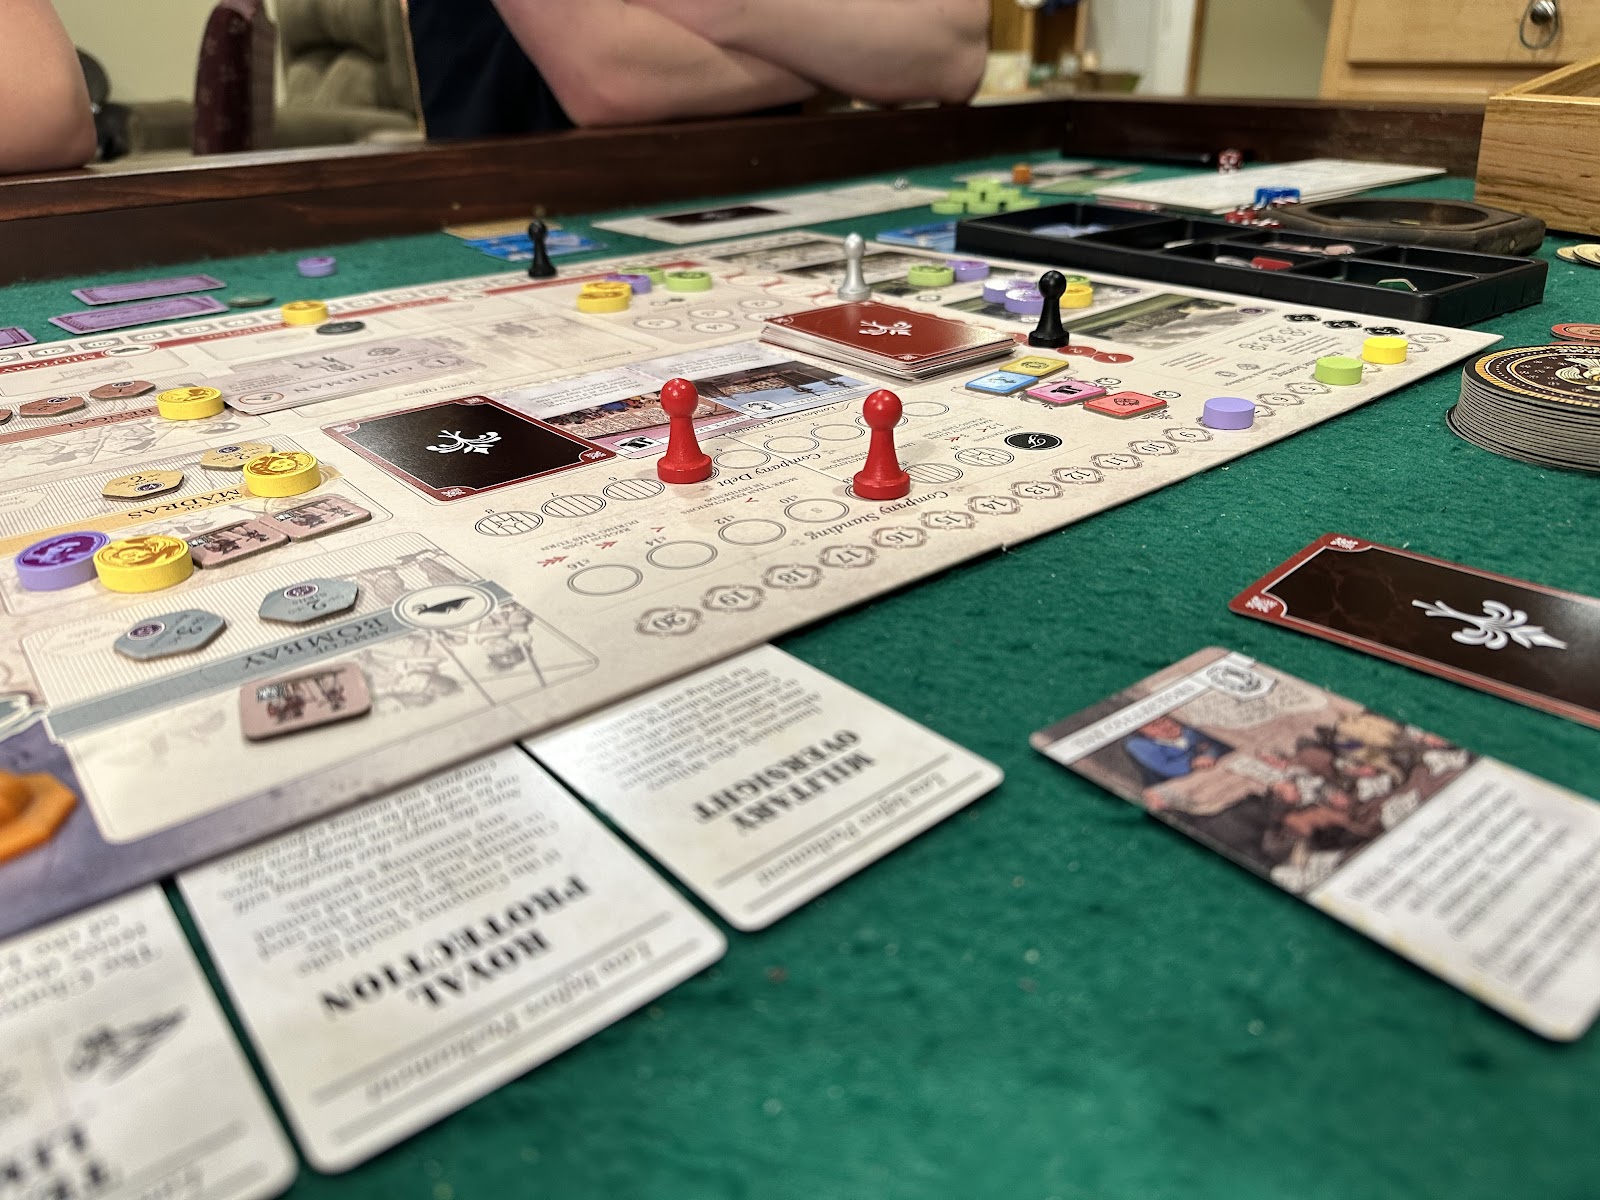 Tokens and pawns on top of the game board for John Company Second Edition